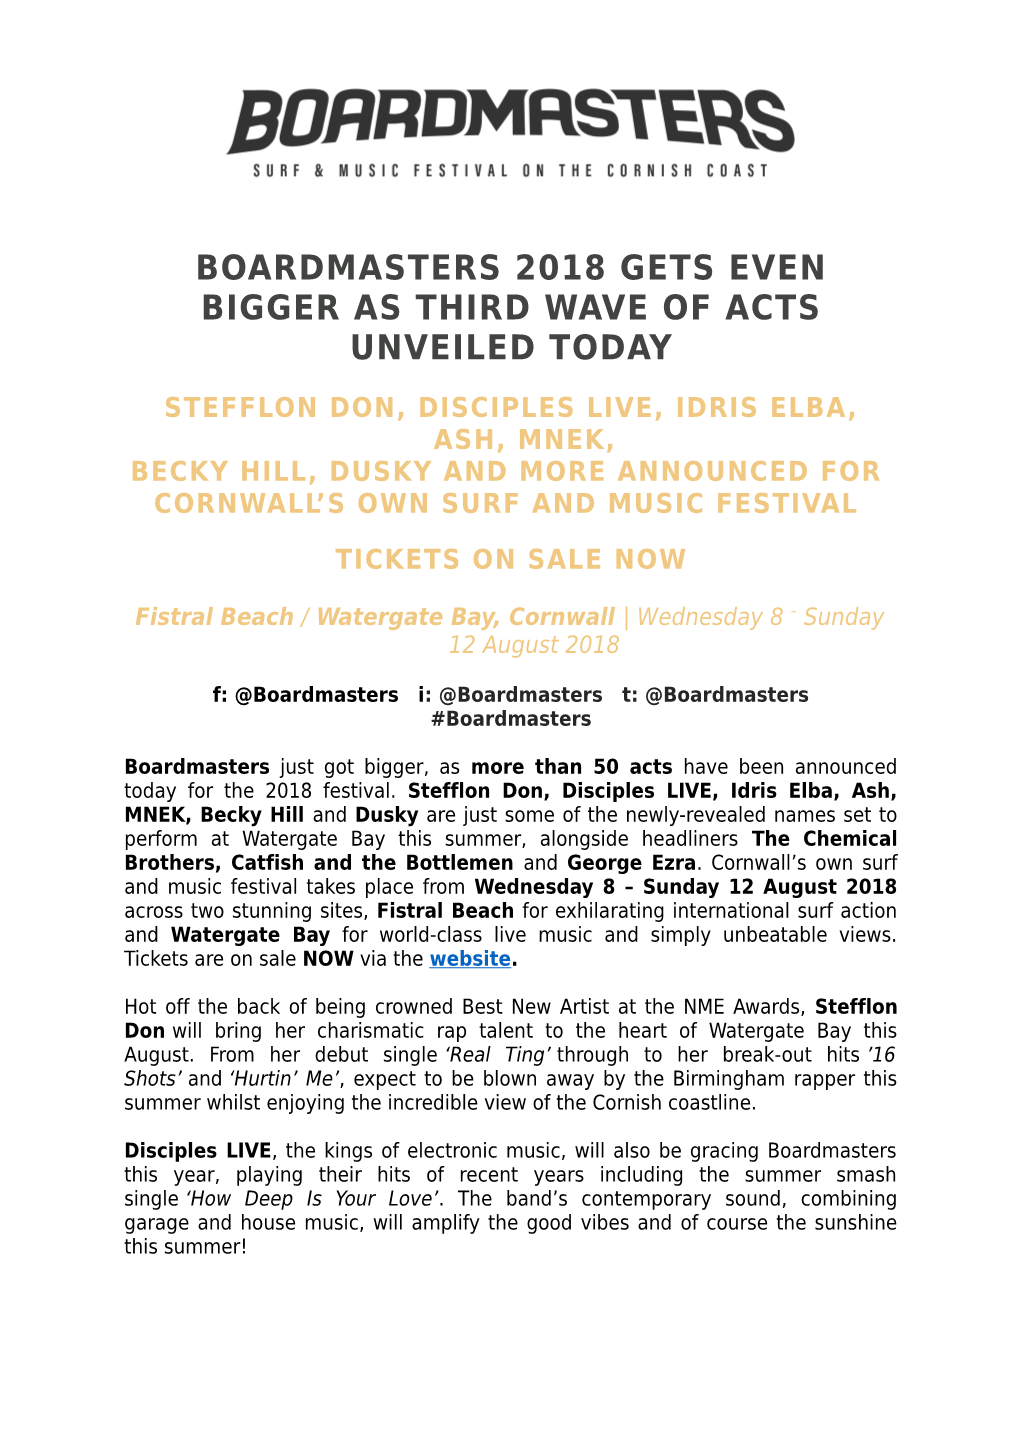 Boardmasters 2018 Gets Even Bigger As Third Wave of Acts Unveiled Today